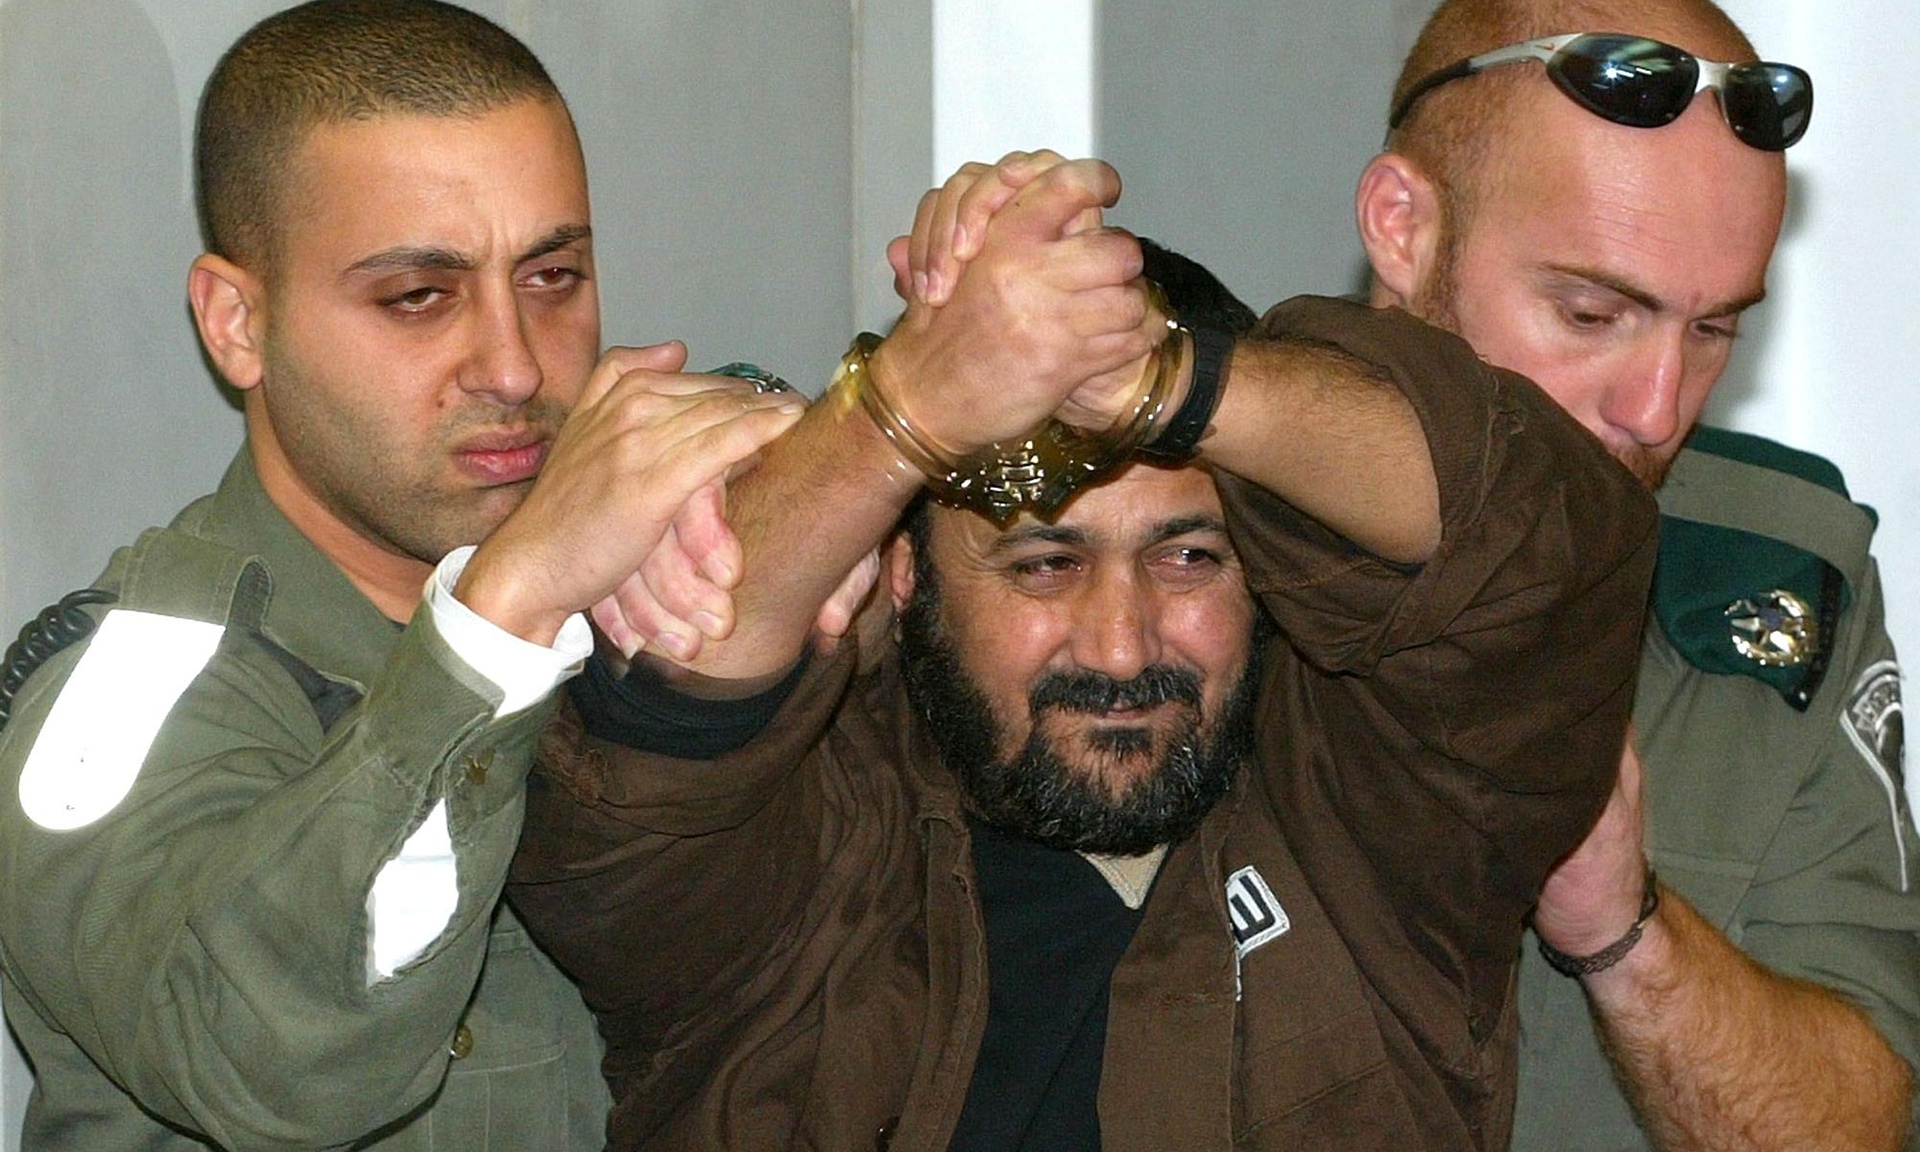 Israeli occupation is root cause of Palestine conflict, says Marwan Barghouti